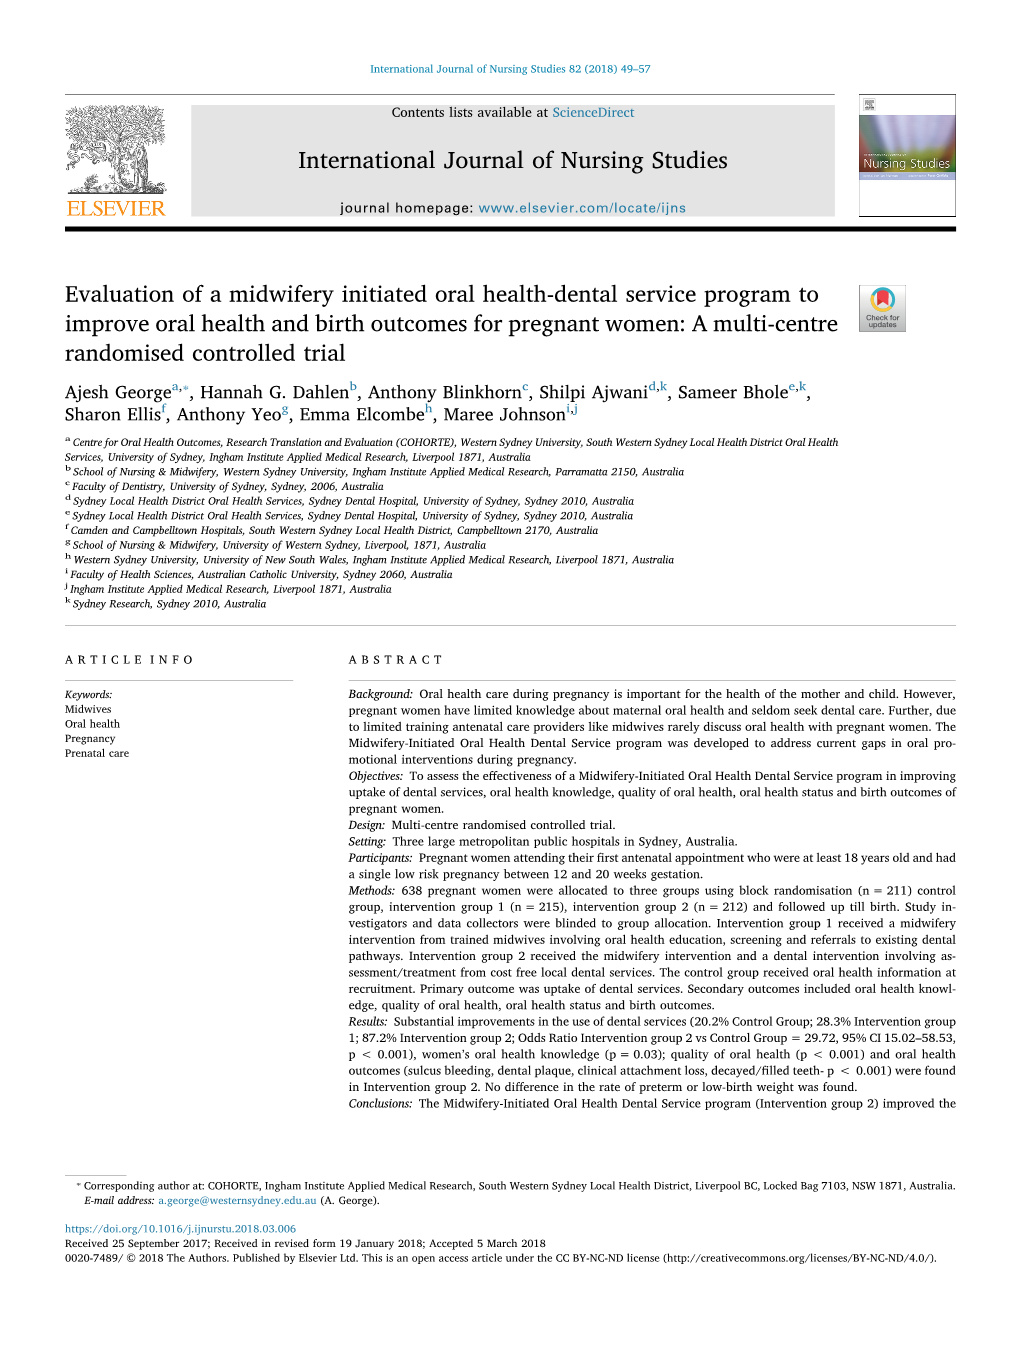 Evaluation of a Midwifery Initiated Oral Health-Dental Service Program To